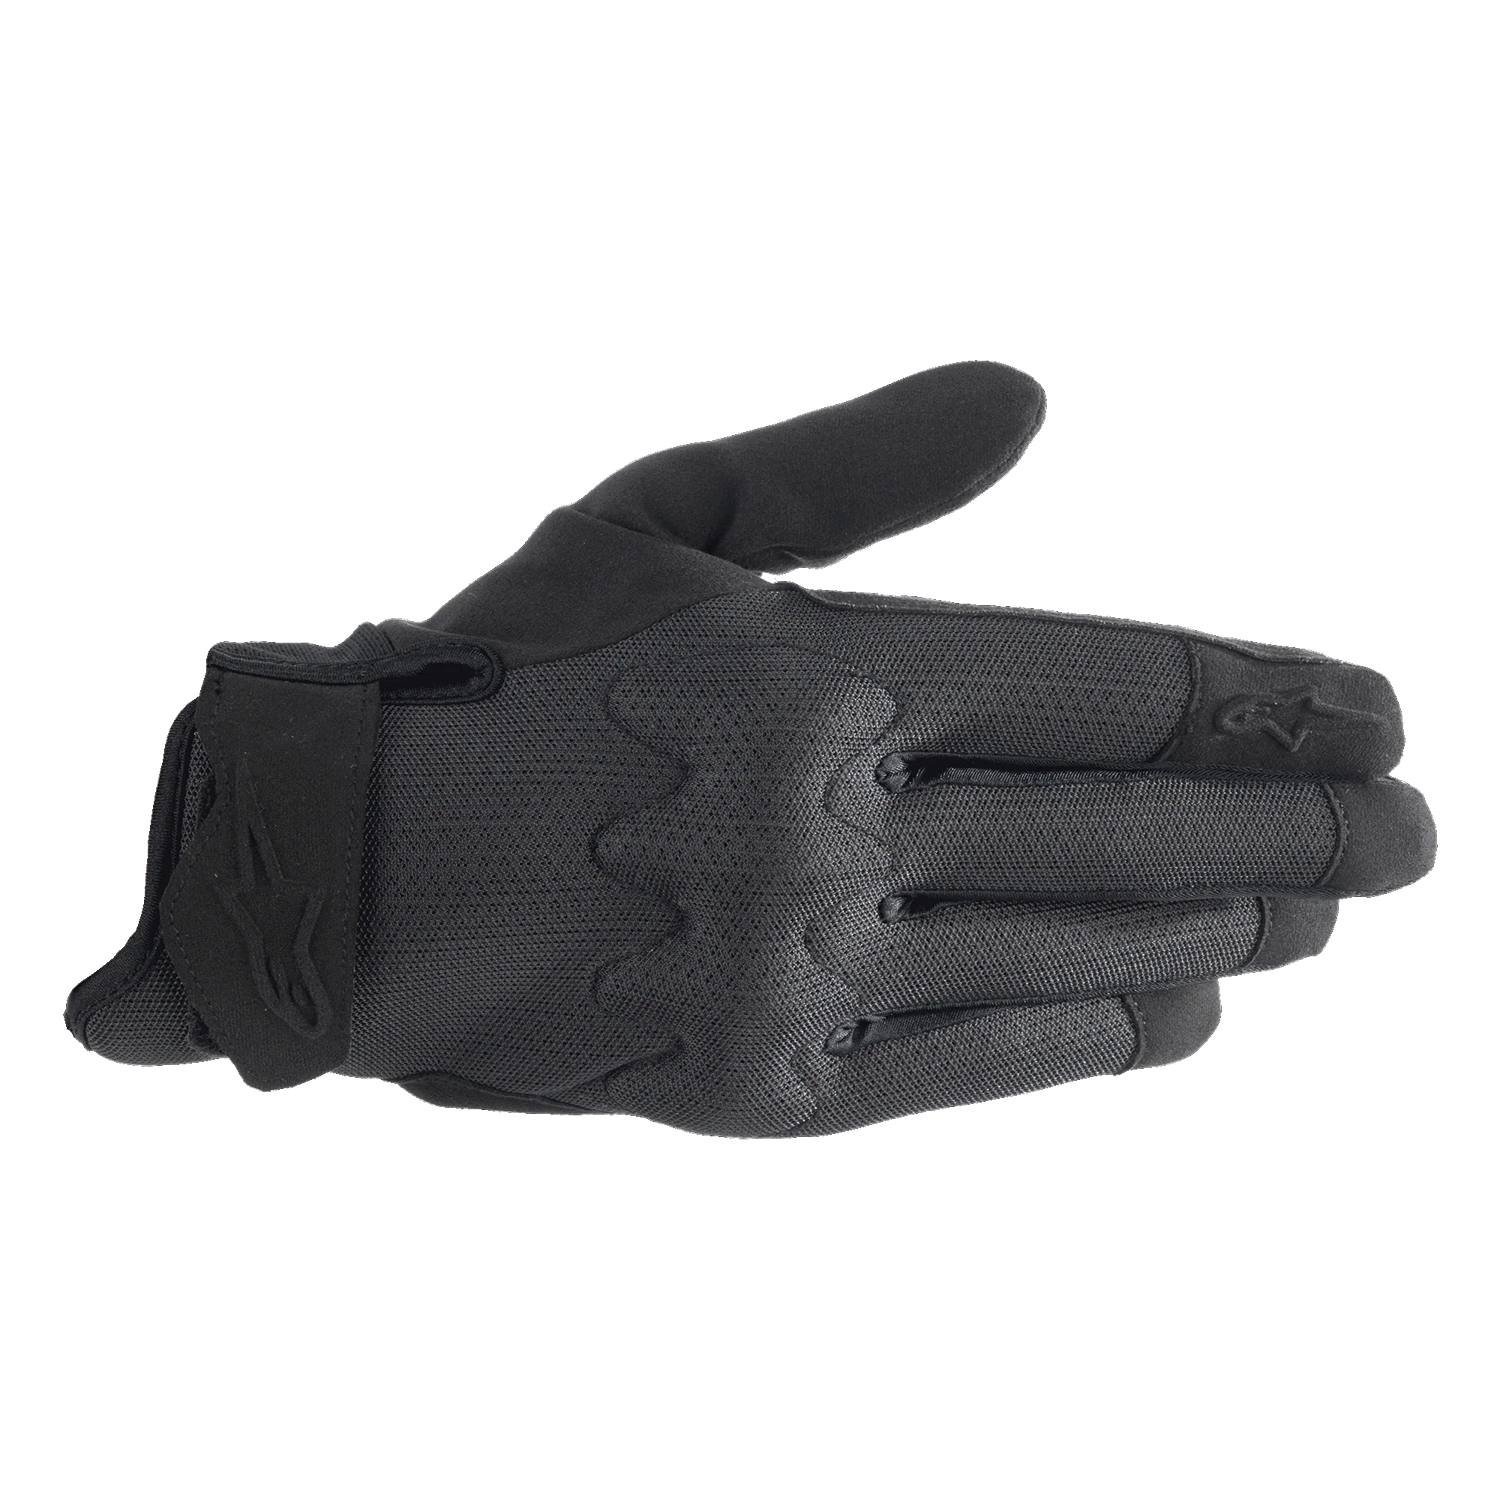 Image of Alpinestars Stated Air Gloves Black Size M ID 8059347146065